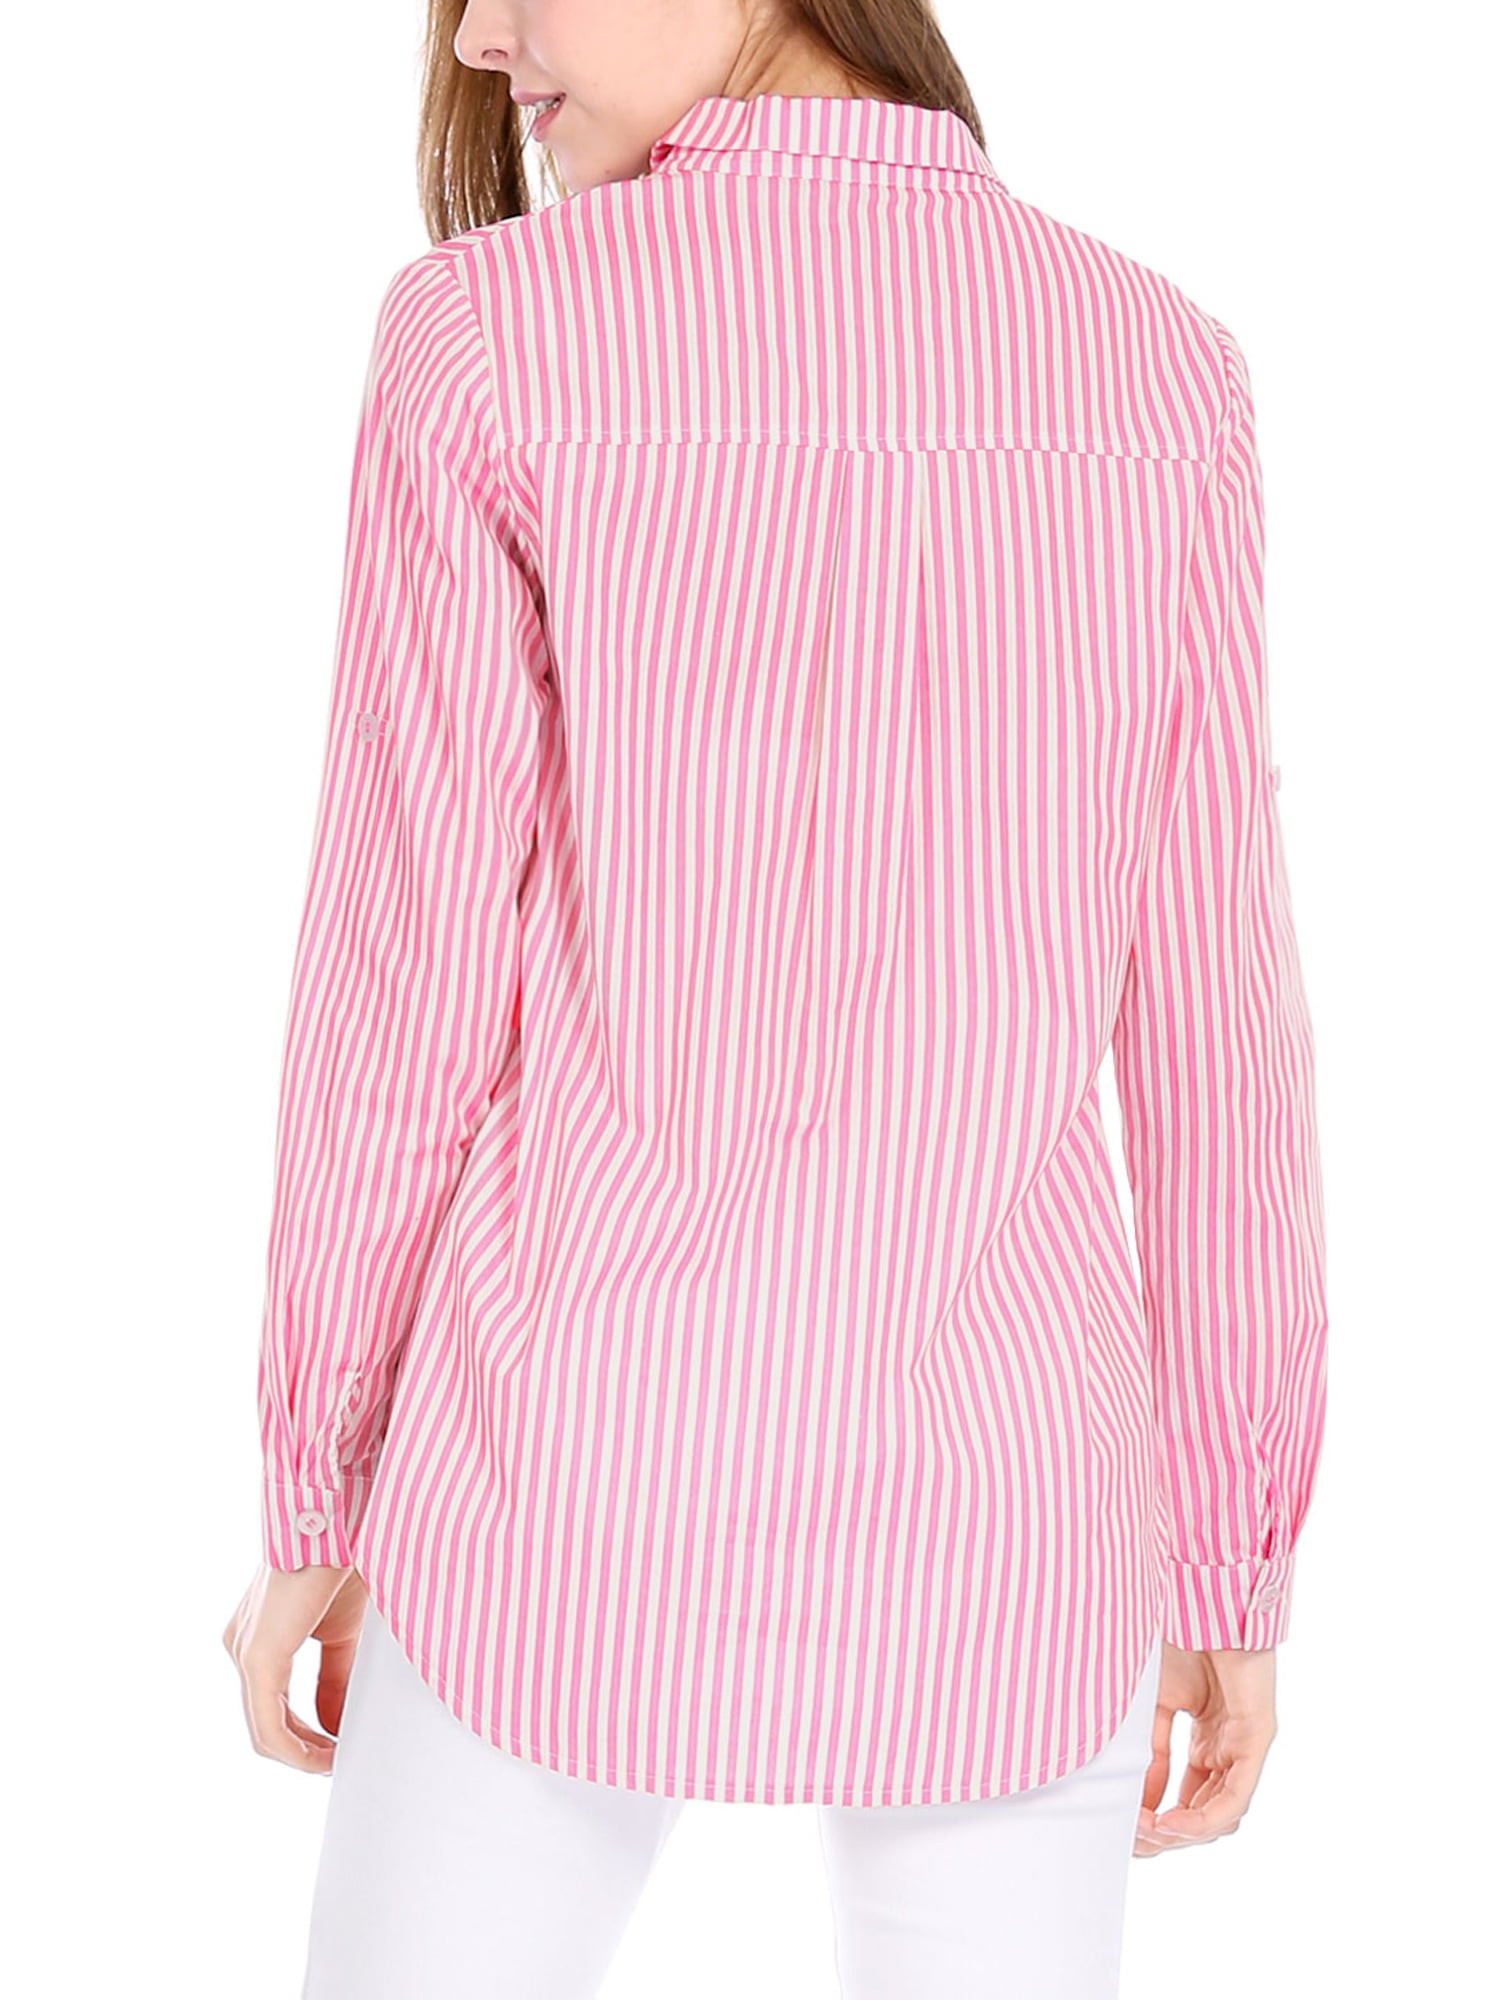 XERSION Women's Size S Pink Stripped Long Sleeve 3/4 Zip Athletic Shirt Top